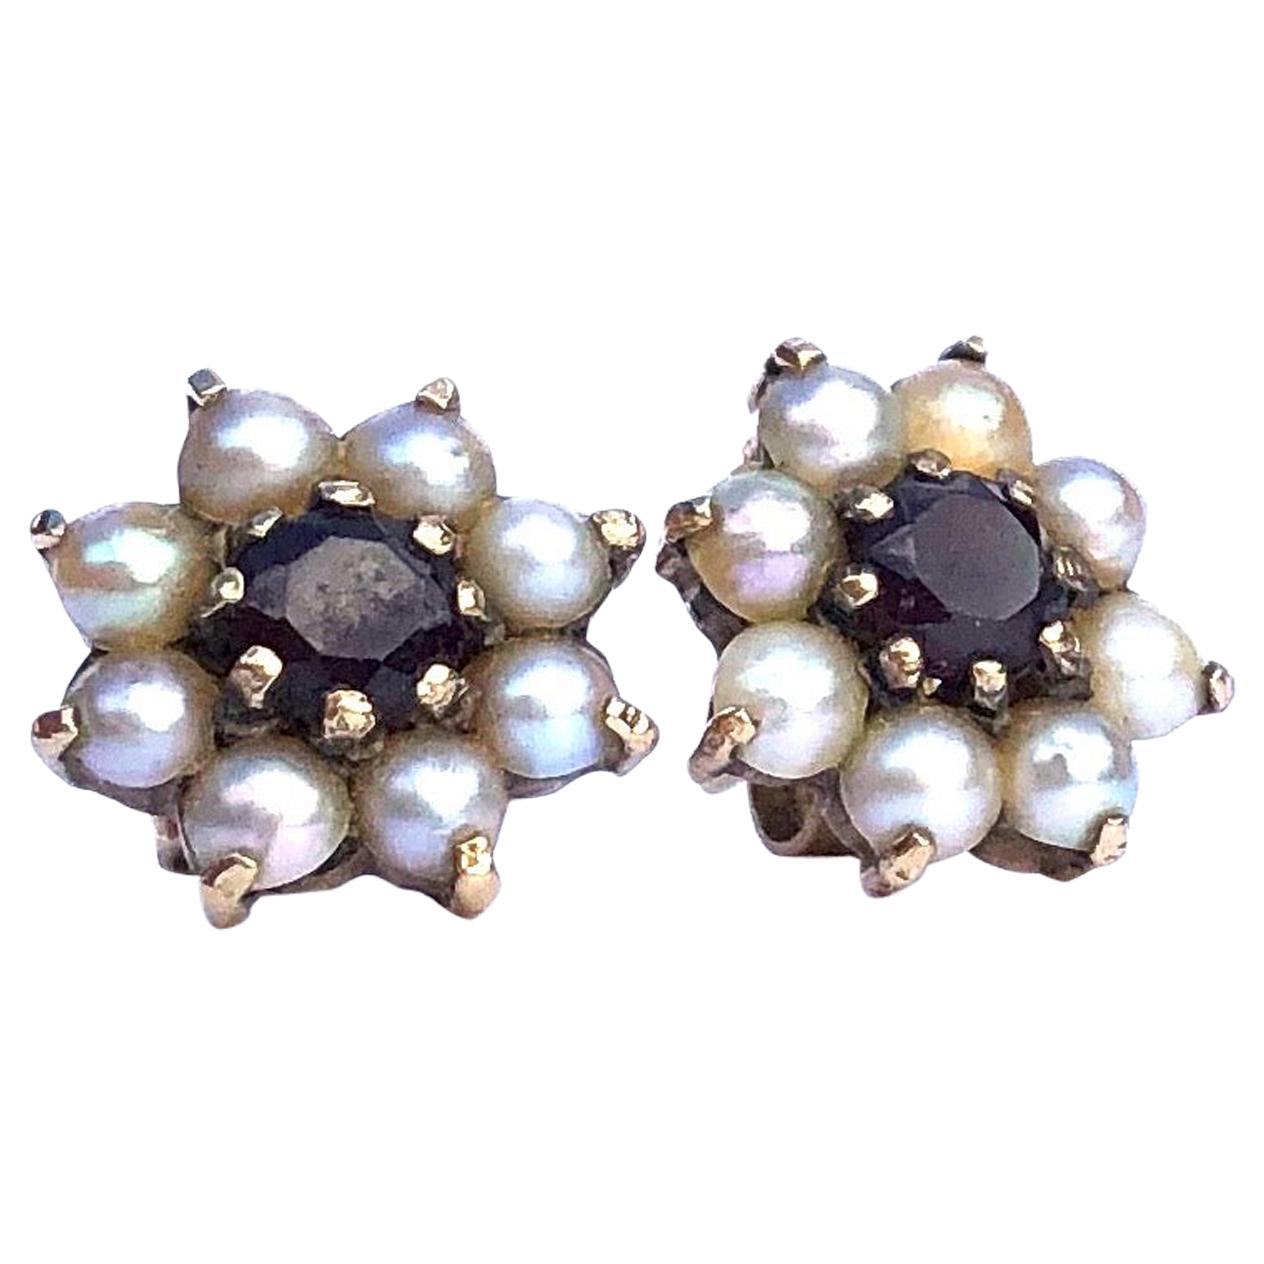 Antique Garnet and Pearl 9 Carat Gold Cluster Earrings